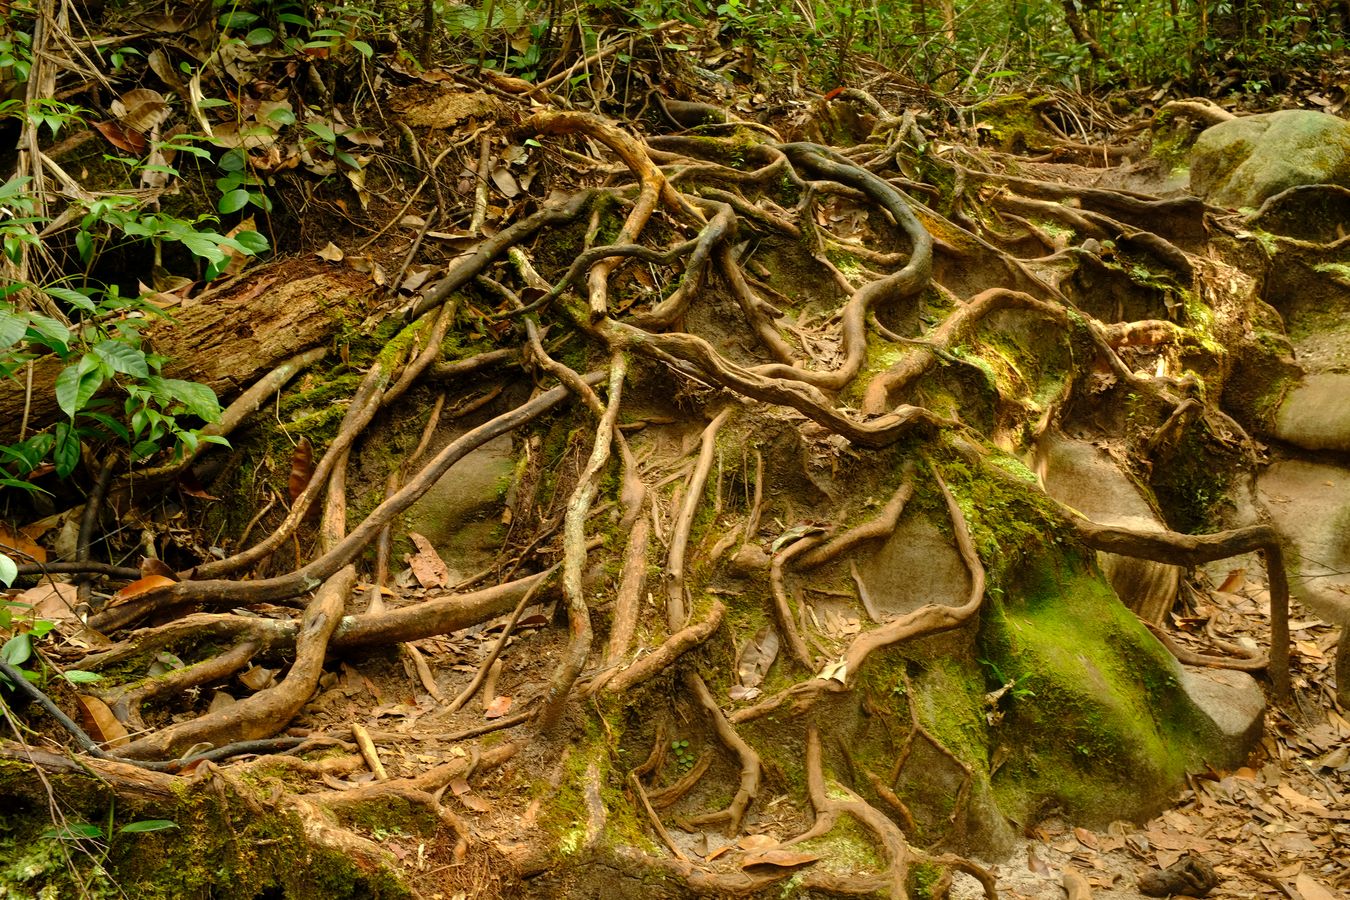 Roots on the surface of the Dipterocarp forest floor